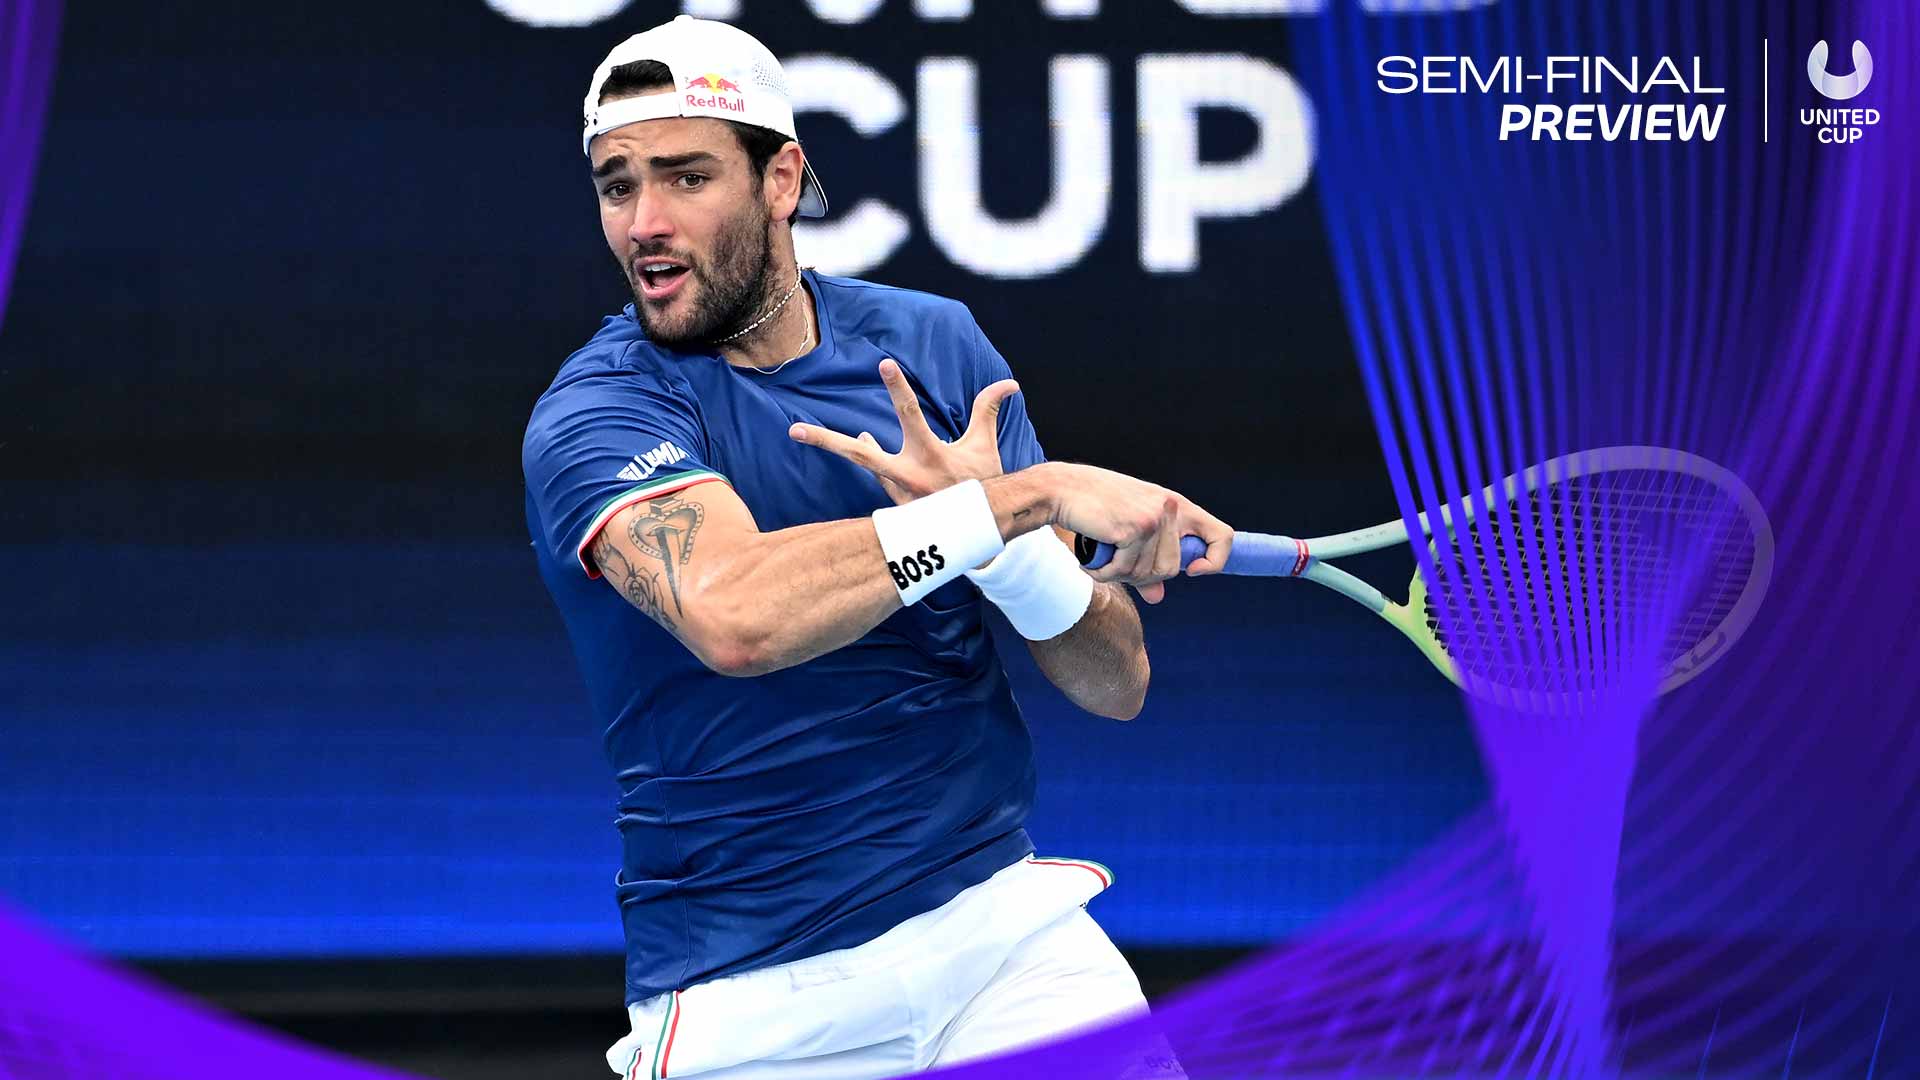 Matteo Berrettini will try to claim his third Top 10 win of the United Cup.